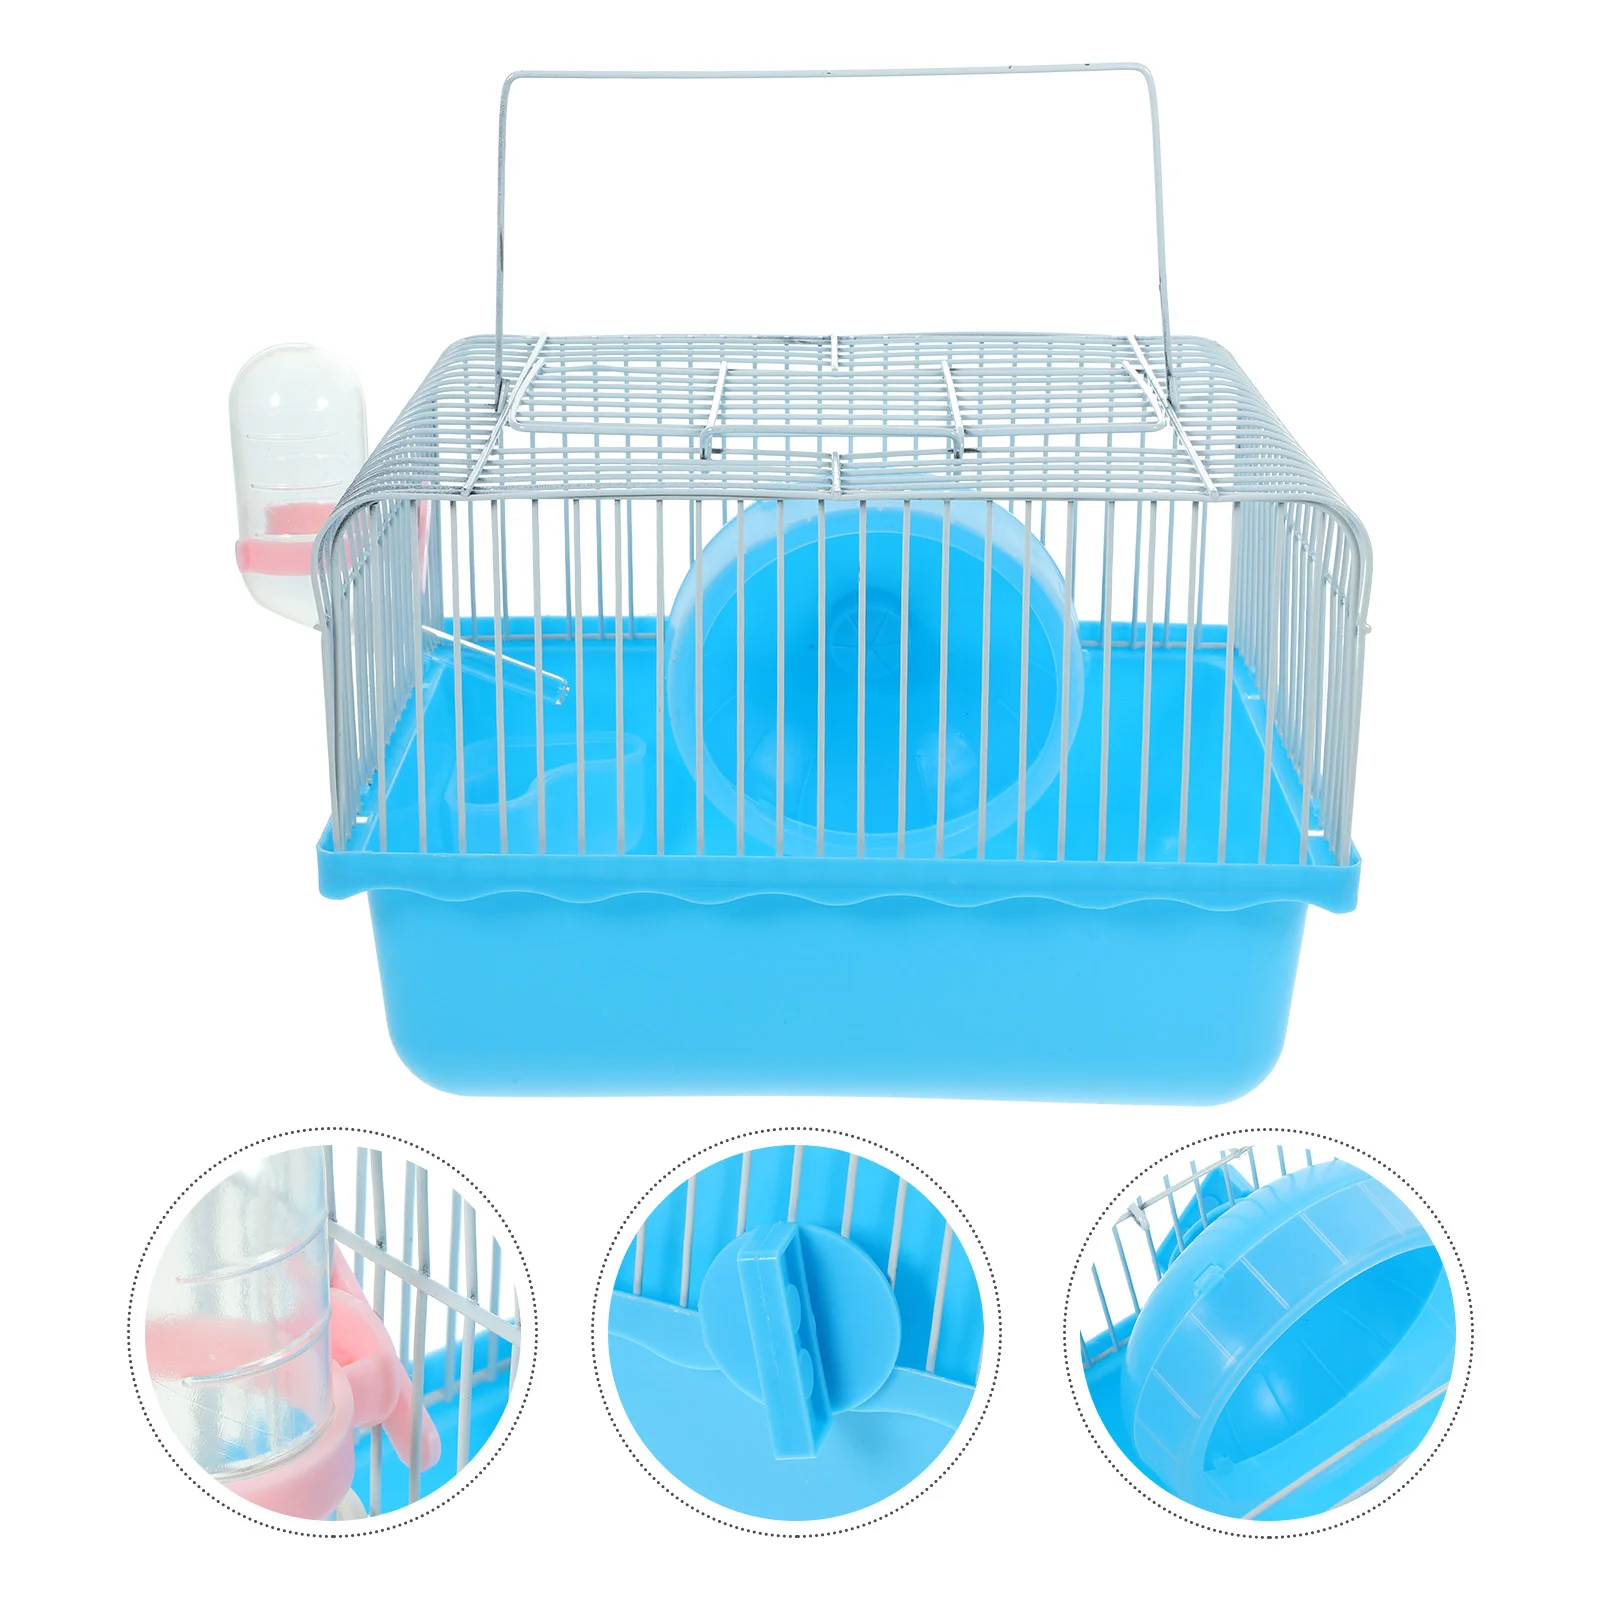 Hamster-Cage-Travel-Carry-Rat-Cage-Small-Pets-Supplies-Hamster-Toy-Accessories-Blue.jpg